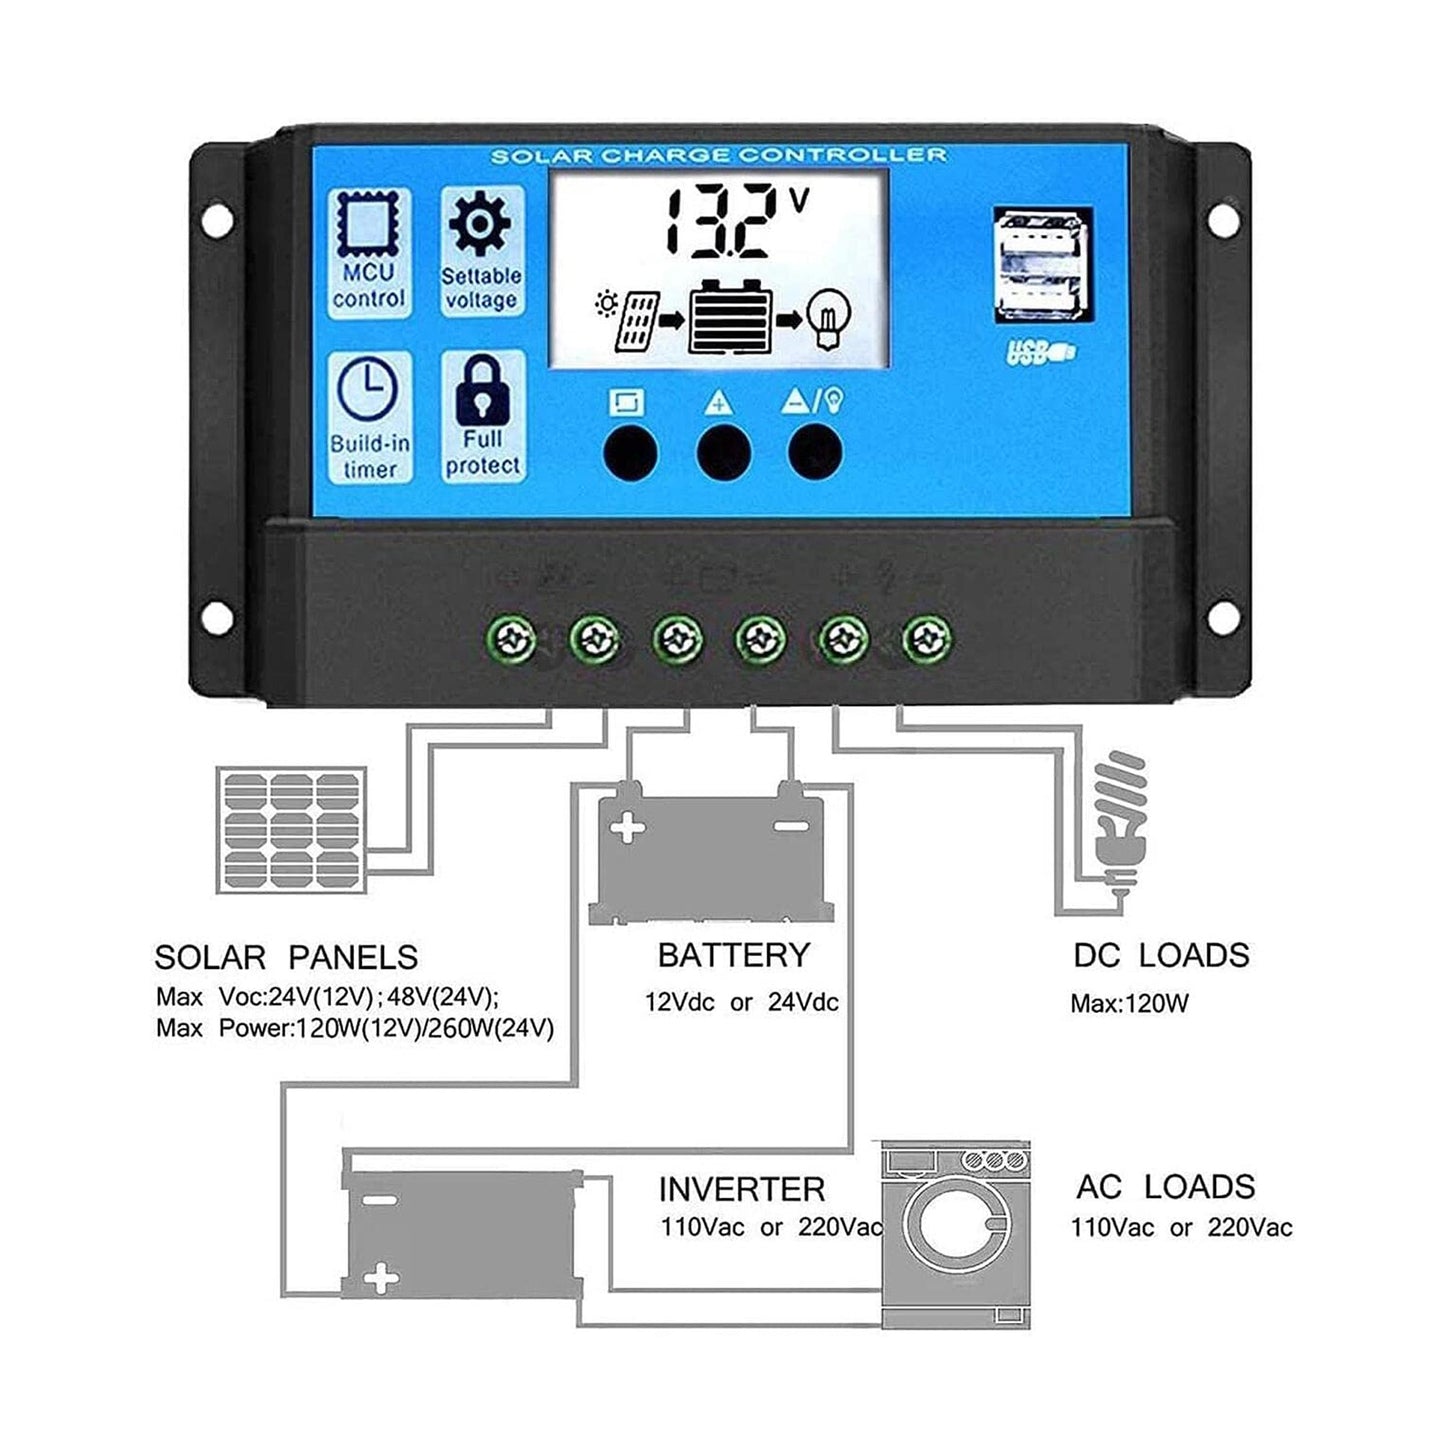 Solar Charge Controller, 10A Solar Panel Controller 12V 24V Adaptive PWM Auto Parameter Adjustable LCD Display Solar Panel Battery Regulator with Dual USB Port - RS5202 - REES52